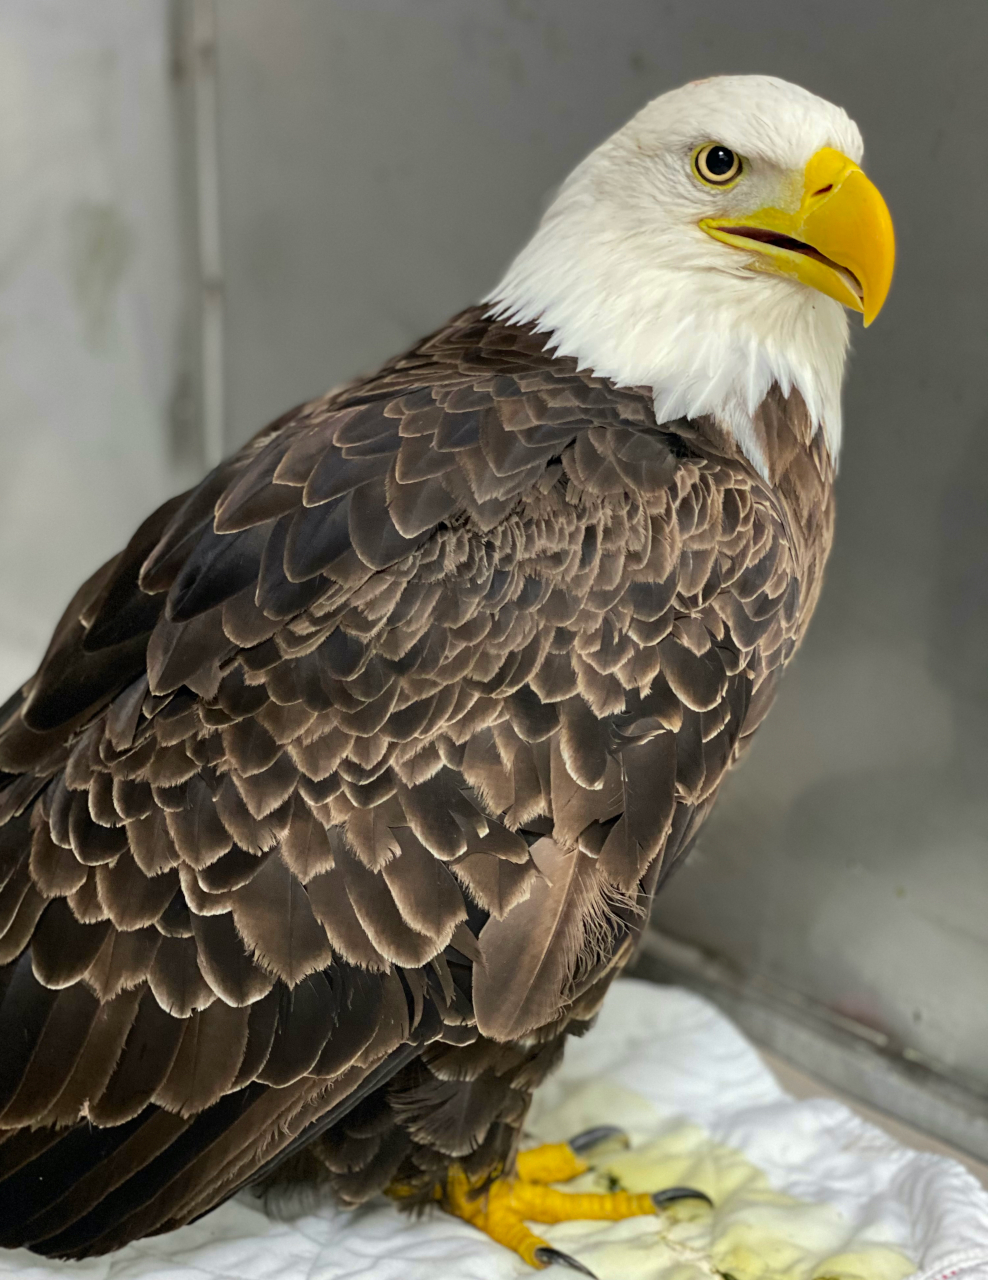 Bald eagle in an enclosure at the wildlife hospital